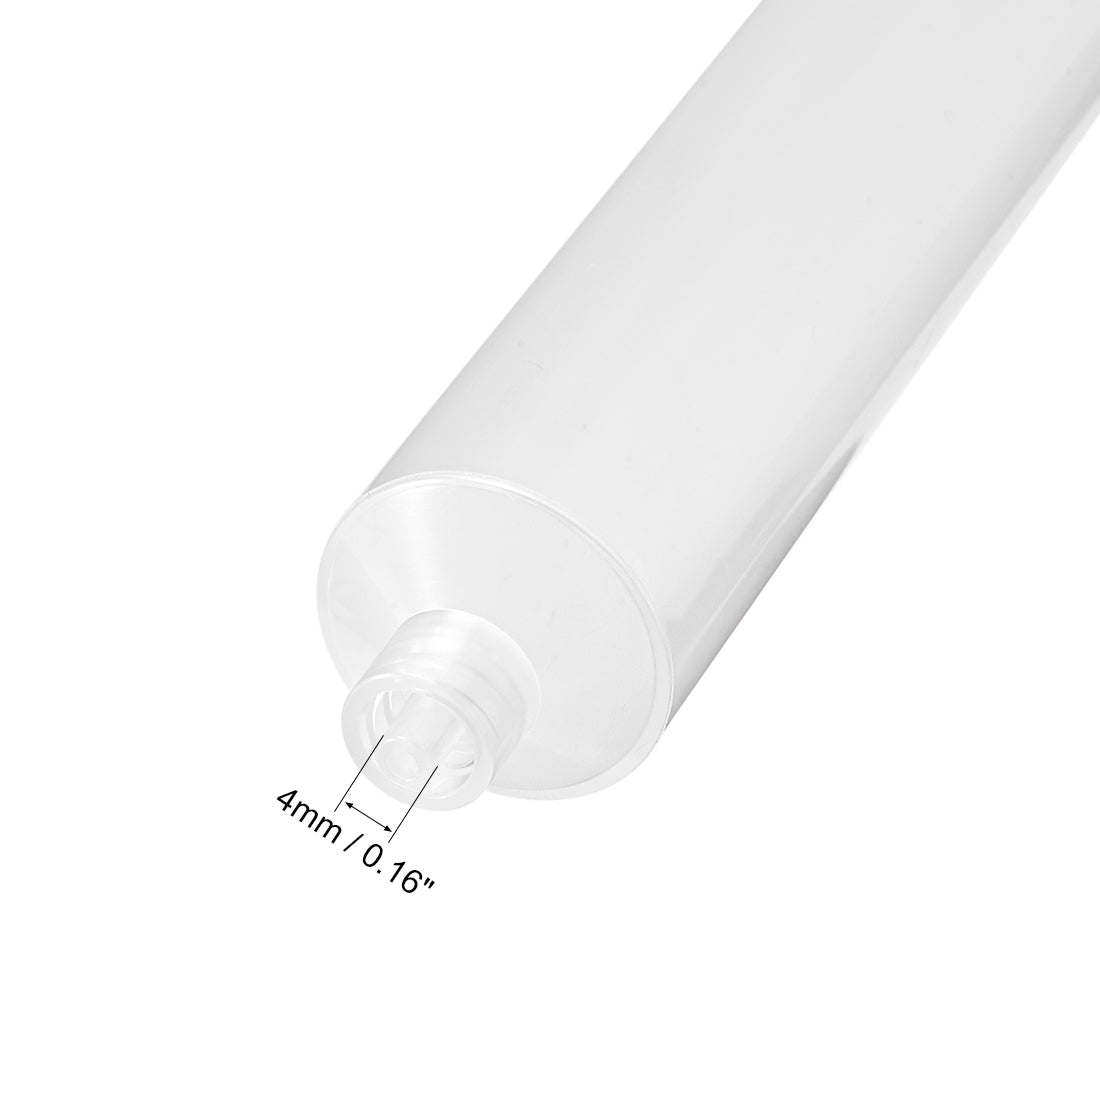 uxcell Uxcell 30CC/30ML Clear Adhesive Syringes Tube Sleeve with Piston for Industrial, 5 Pcs